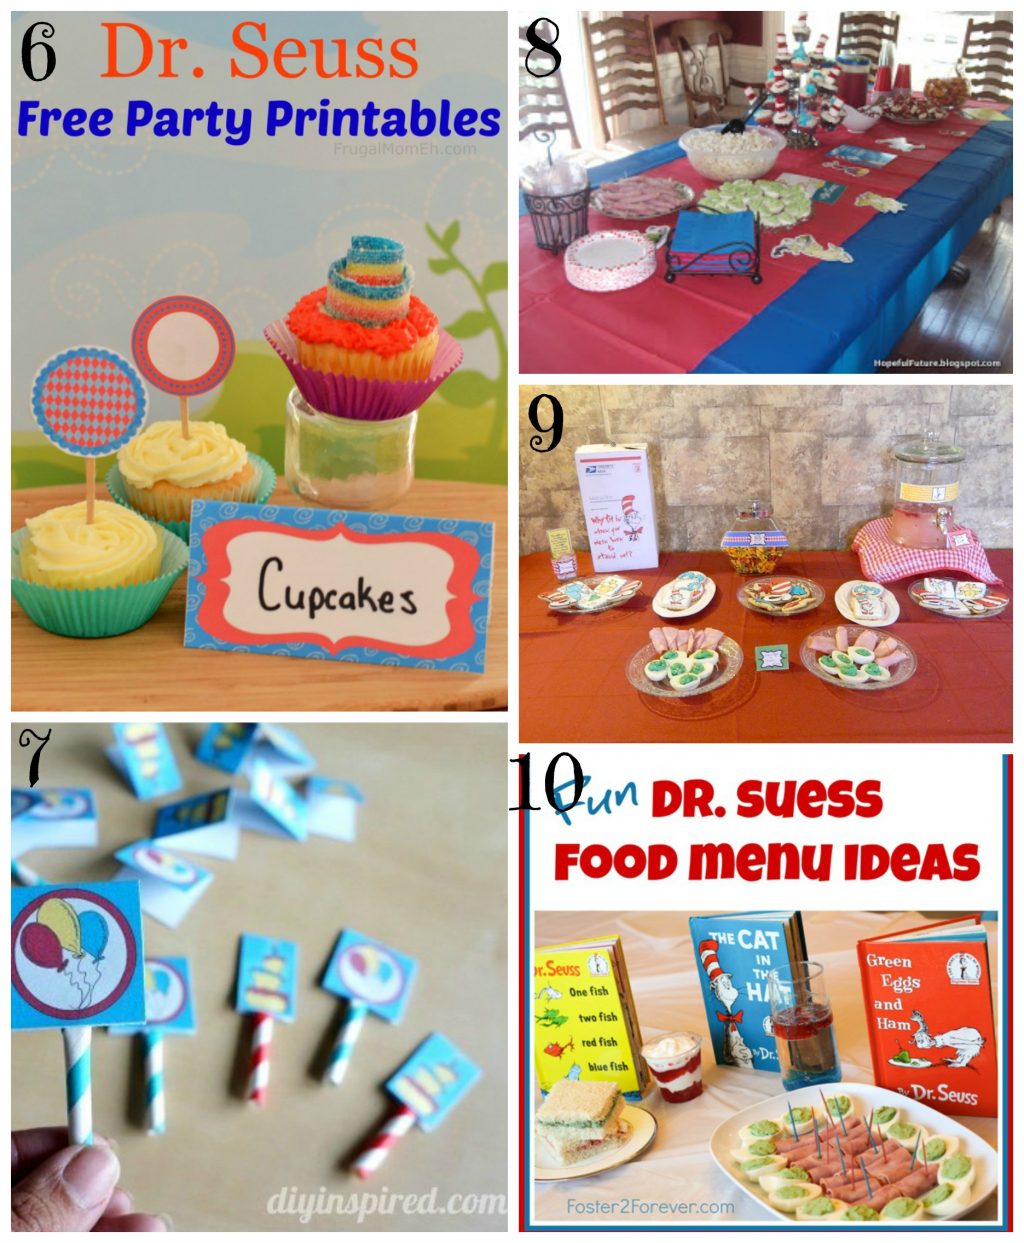 Fun Roundup of Ideas to Host a Dr. Suess Party